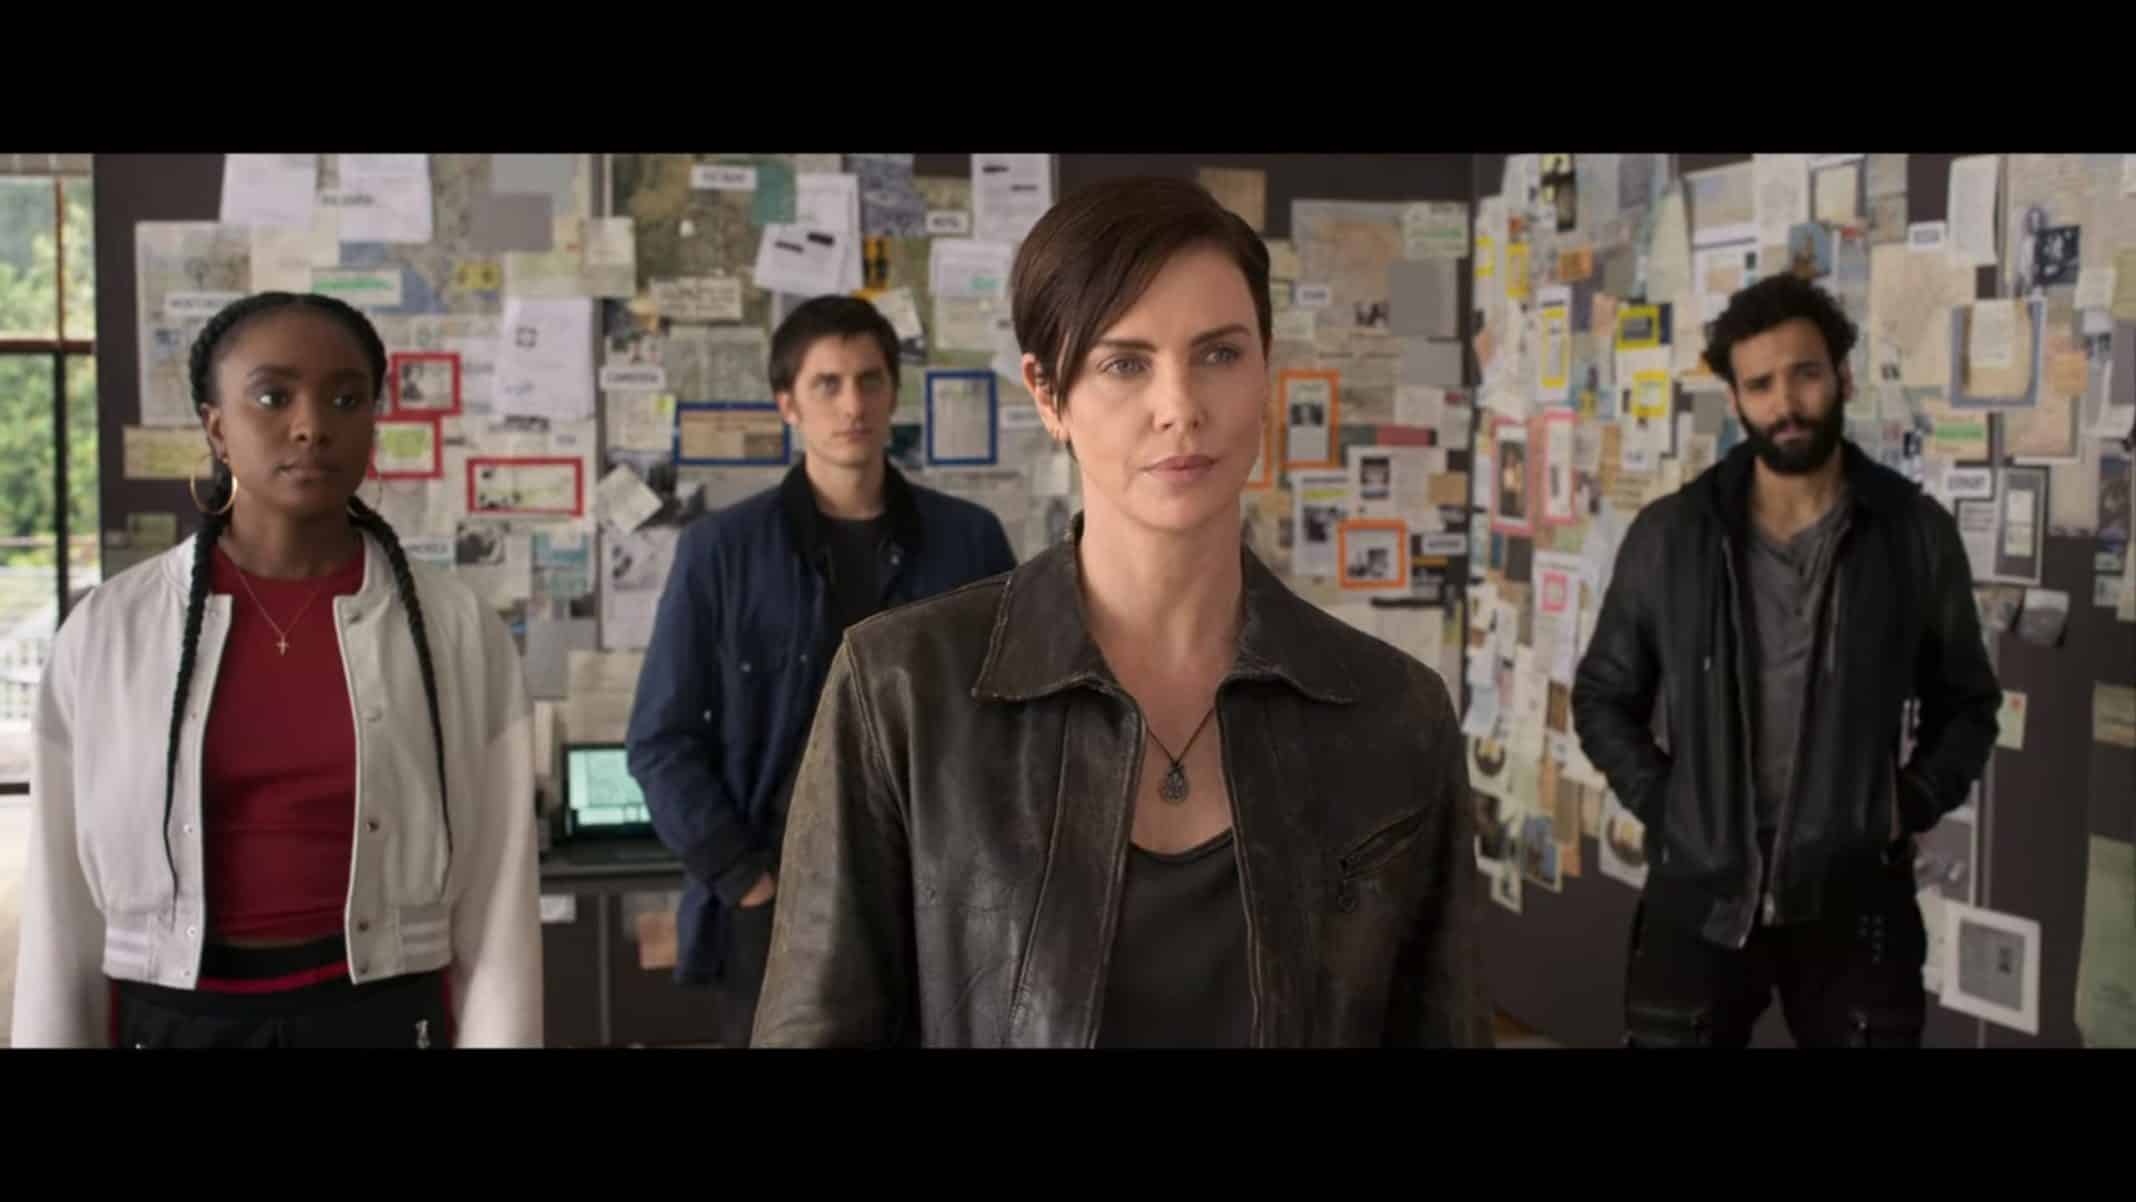 Nile (Kiki Layne), Nicky (Luca Marinelli), Andy (Charlize Theron) and Joe (Marwan Kenzari) standing together at the end of a movie.